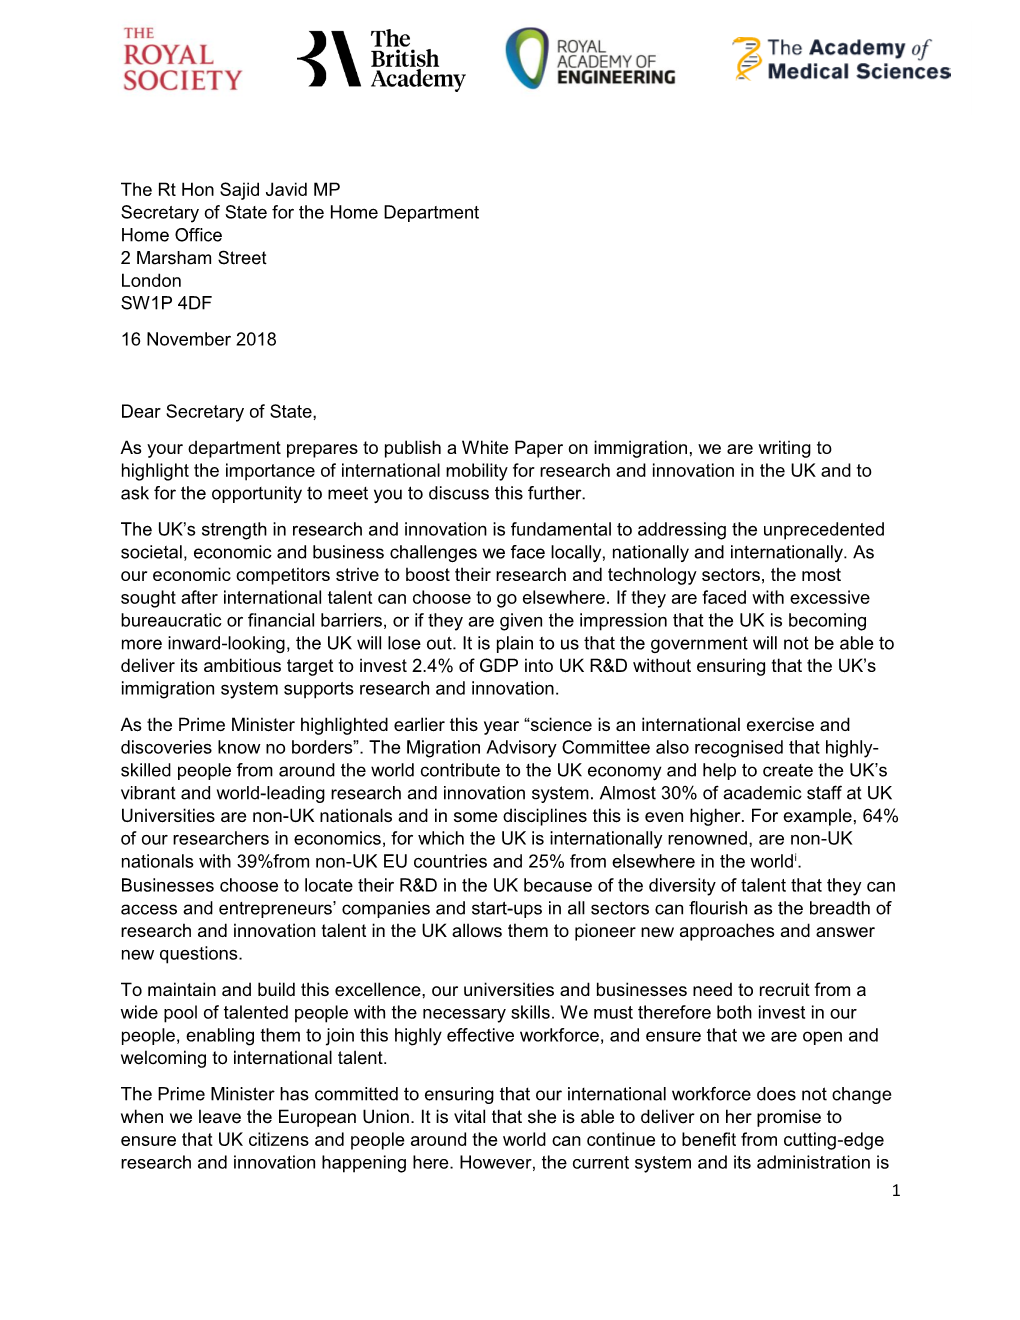 Letter to the Home Secretary Highlighting the Importance Of